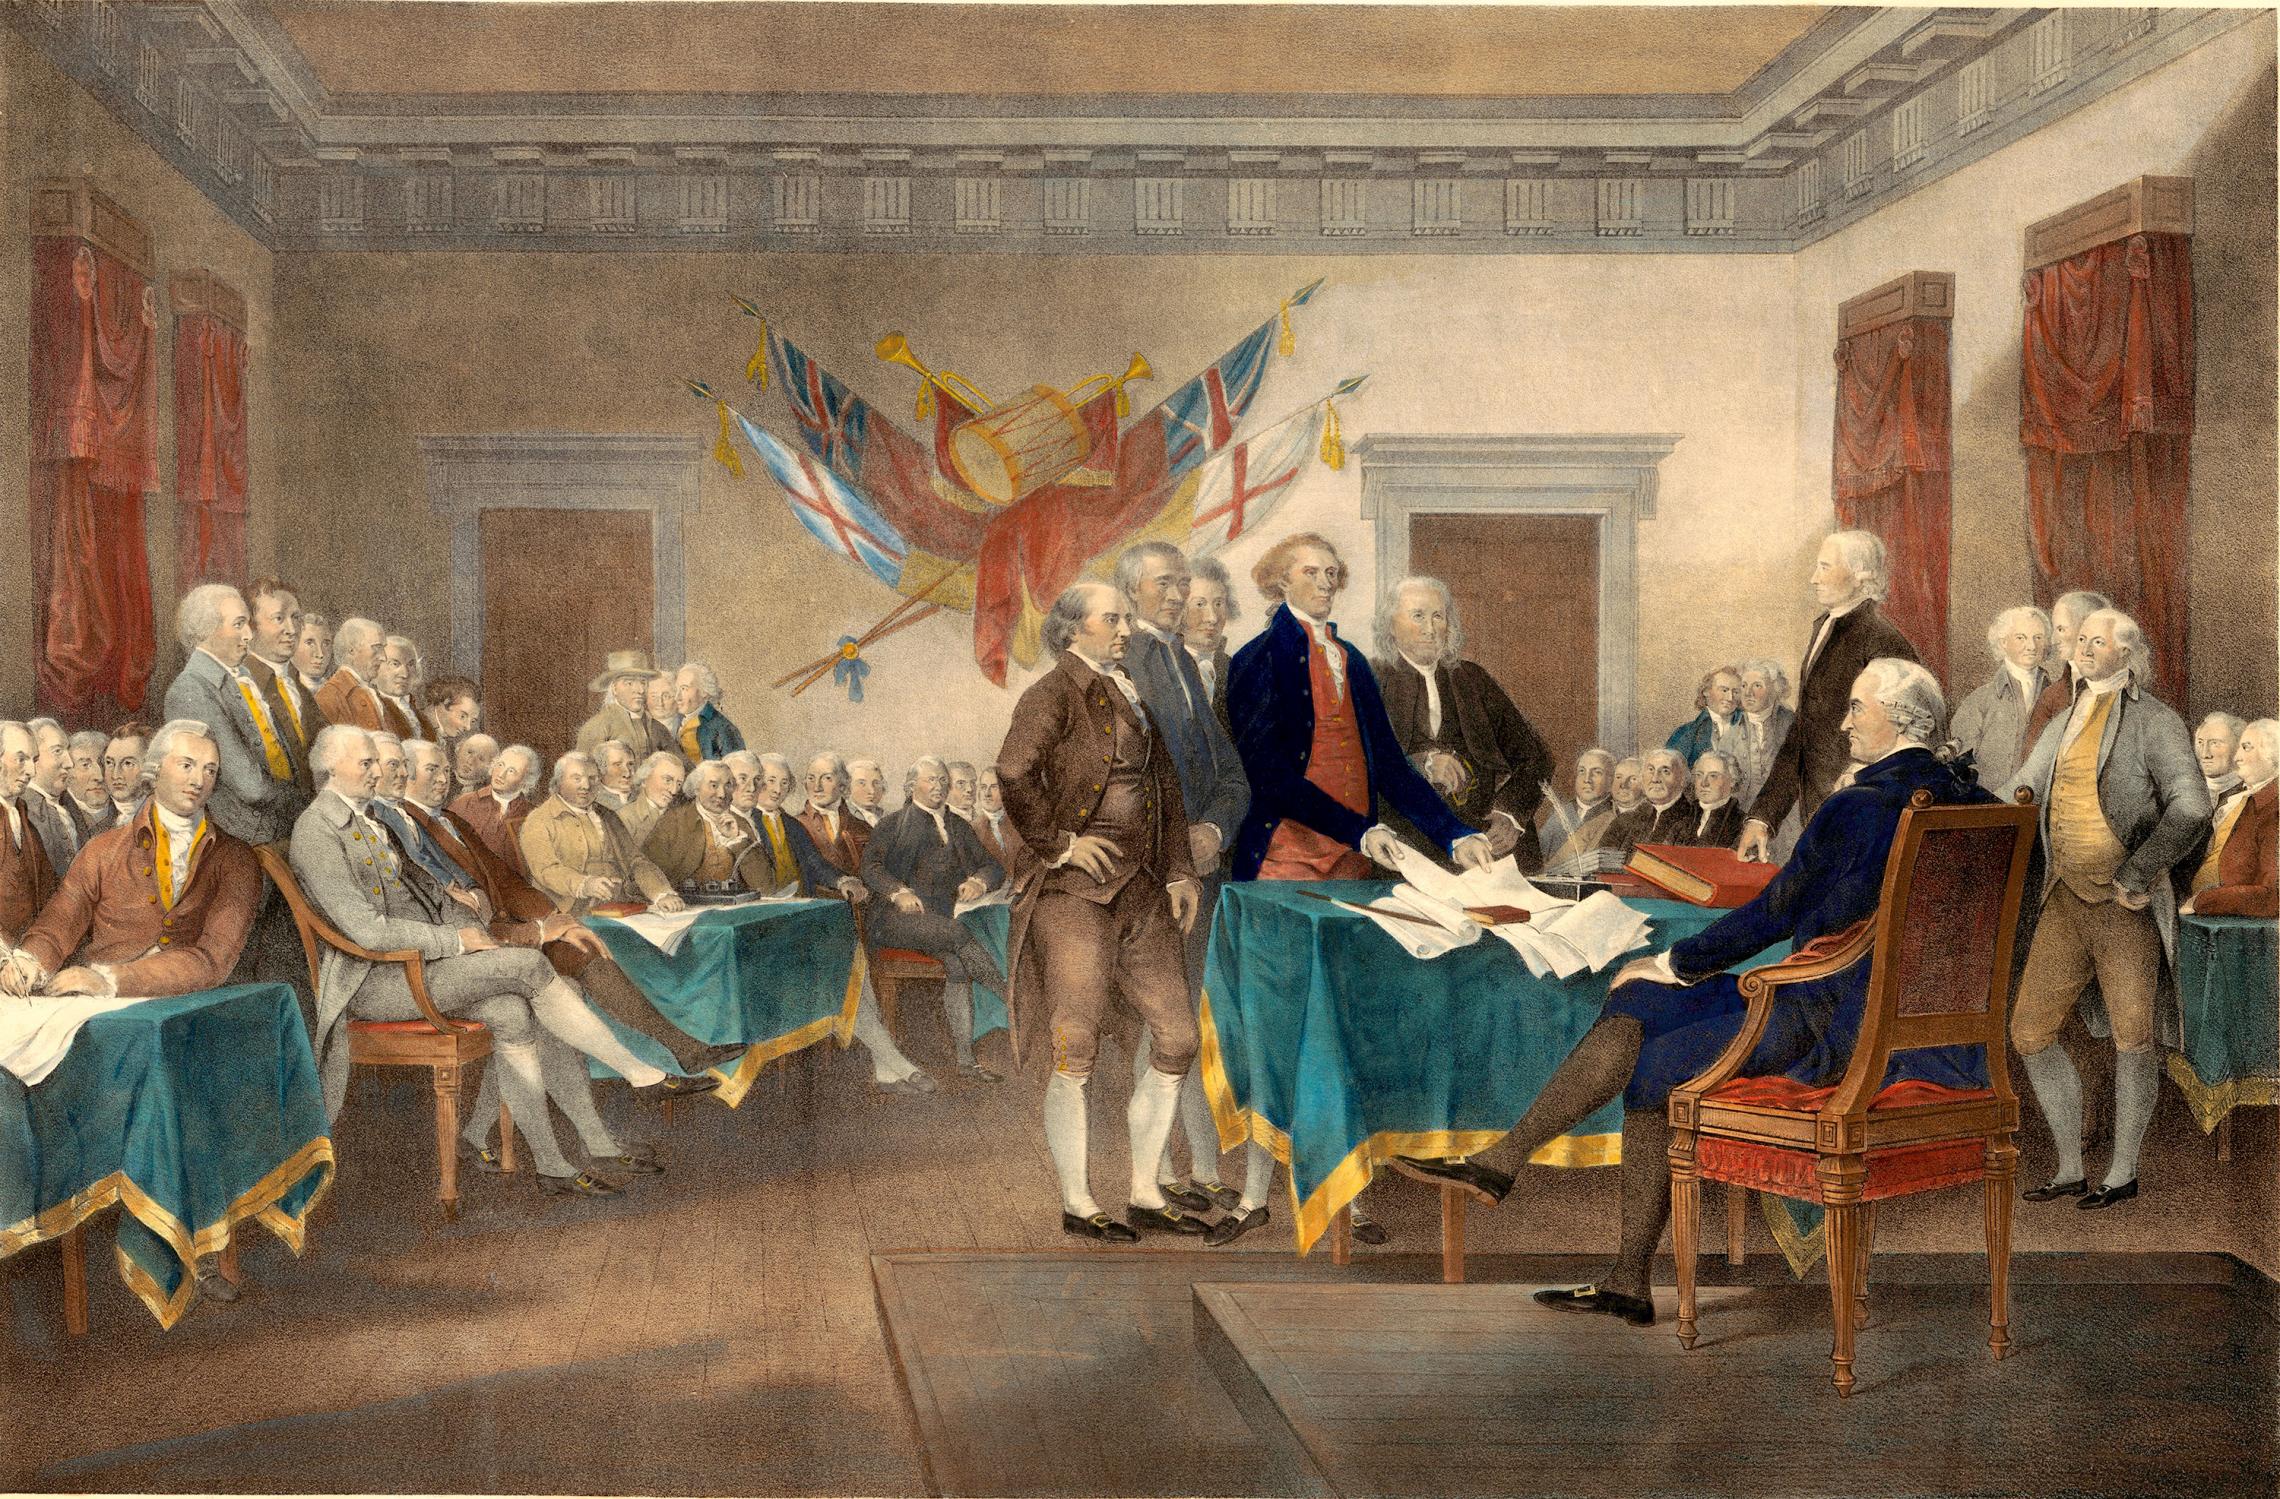 July 4 1776 Is An Important Date In American History Because On That Day